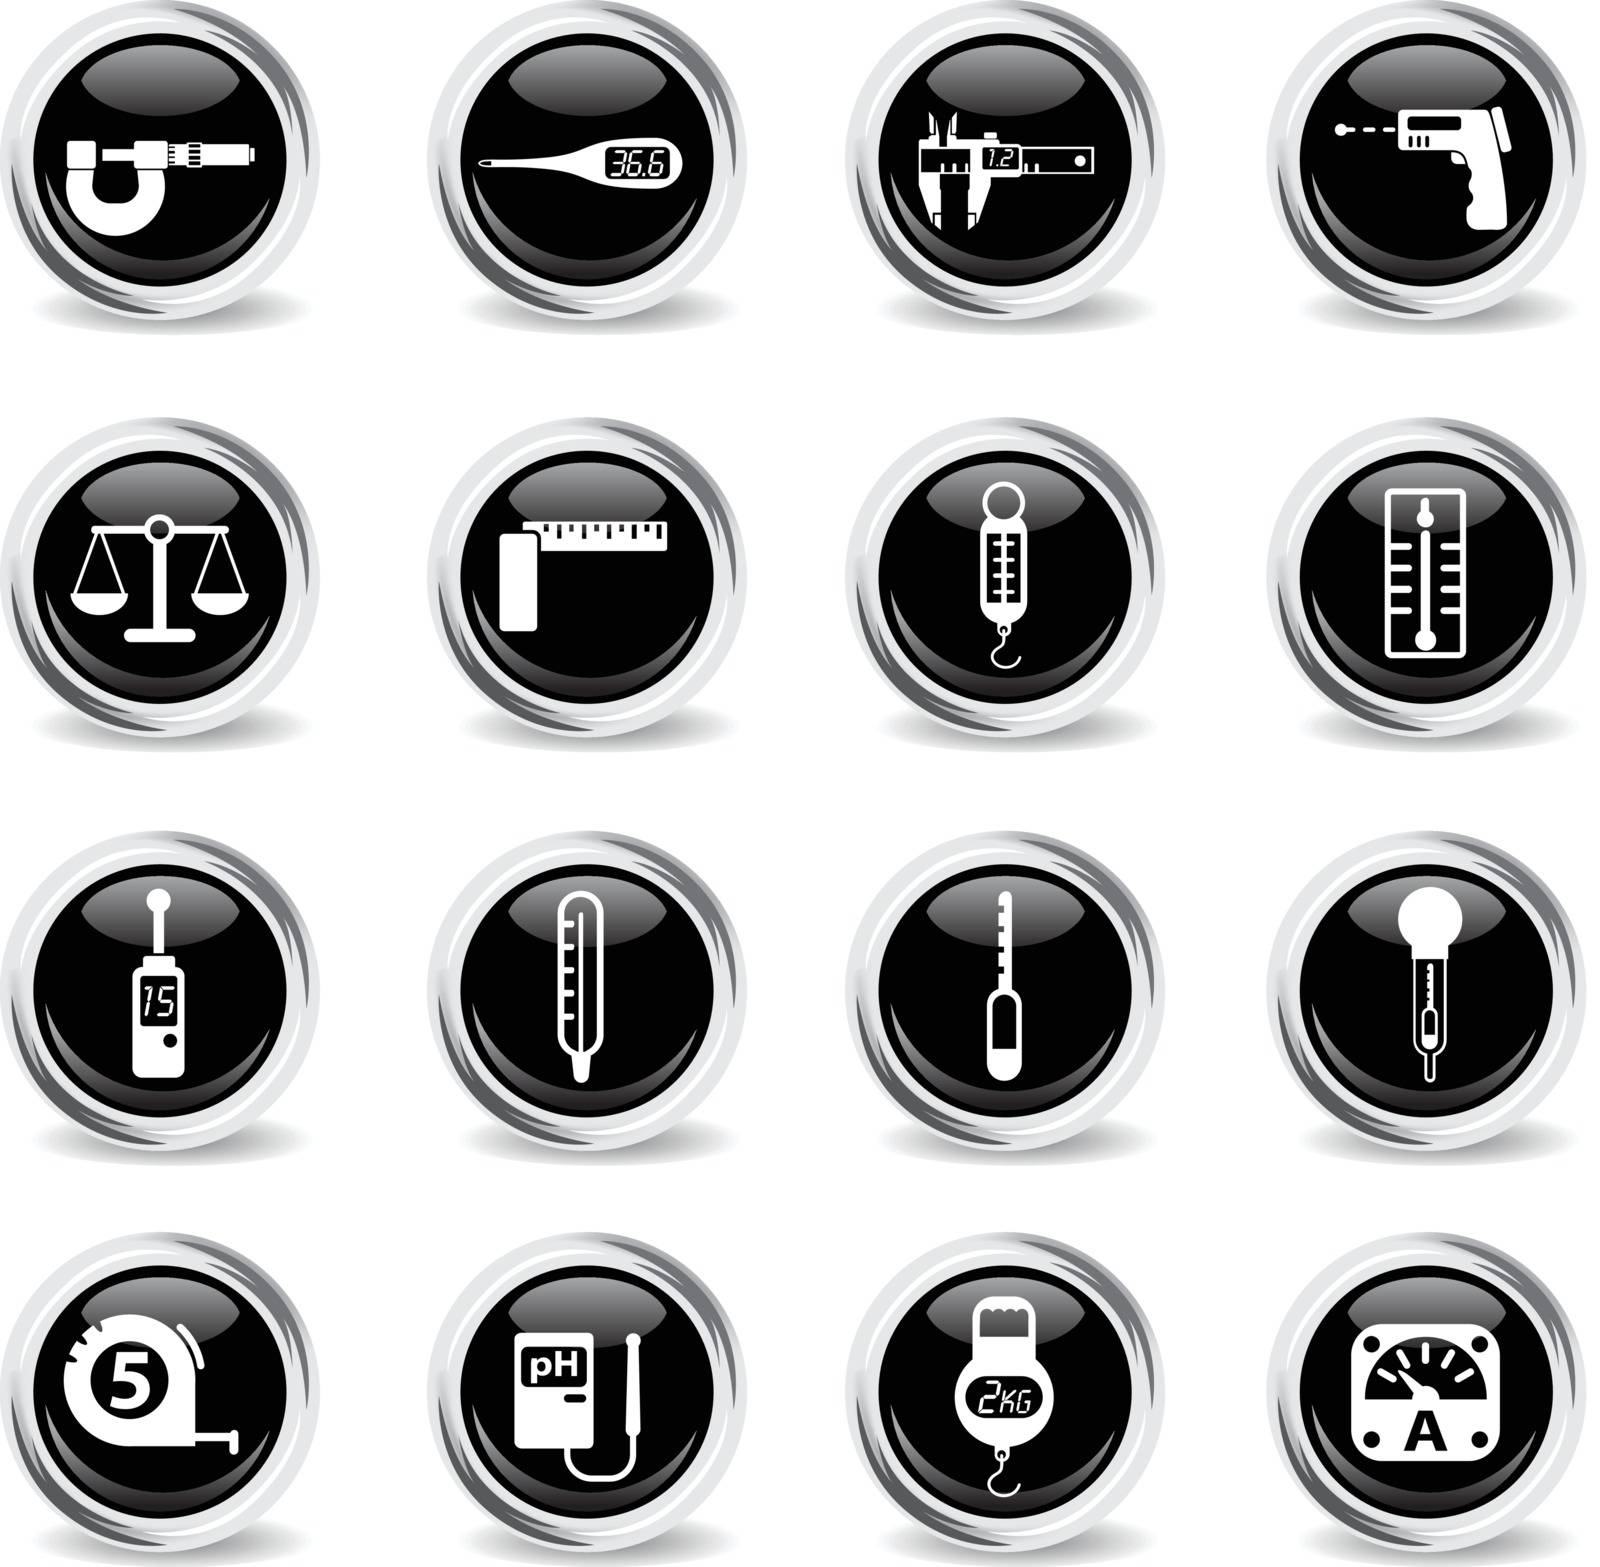 measuring tools web icons - black round chrome buttons